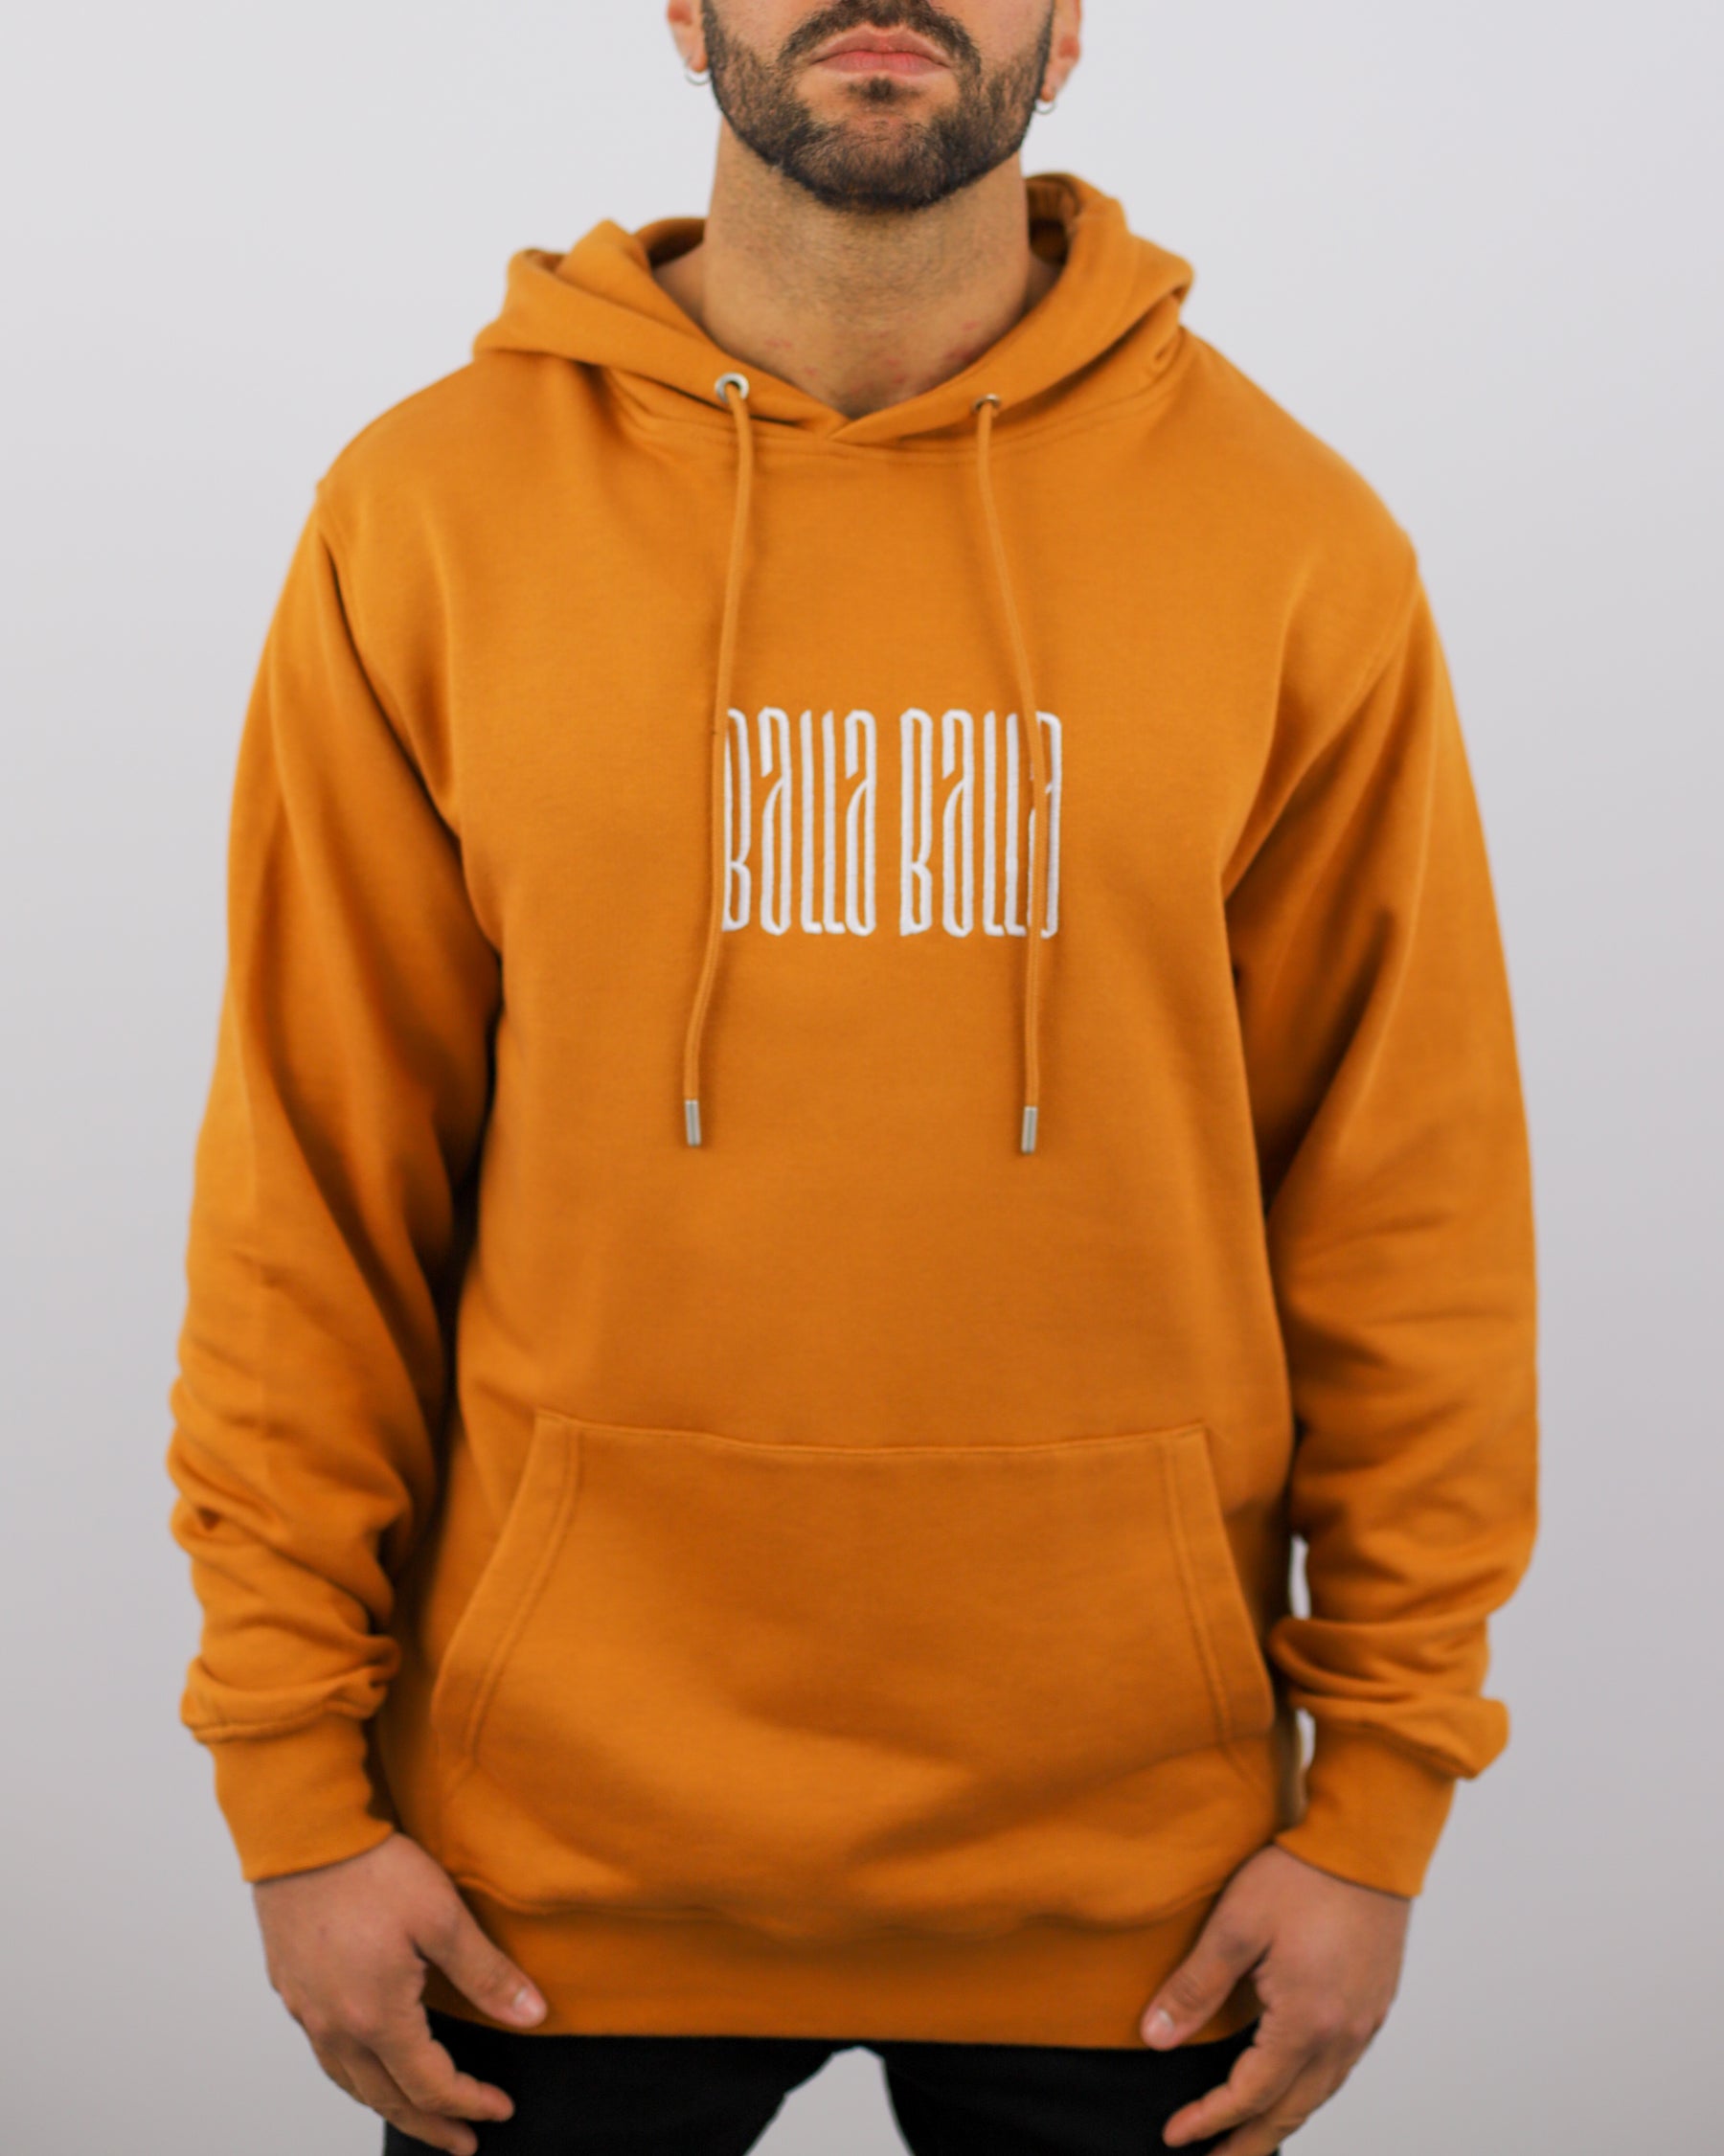 BALLACURRY HOODIE